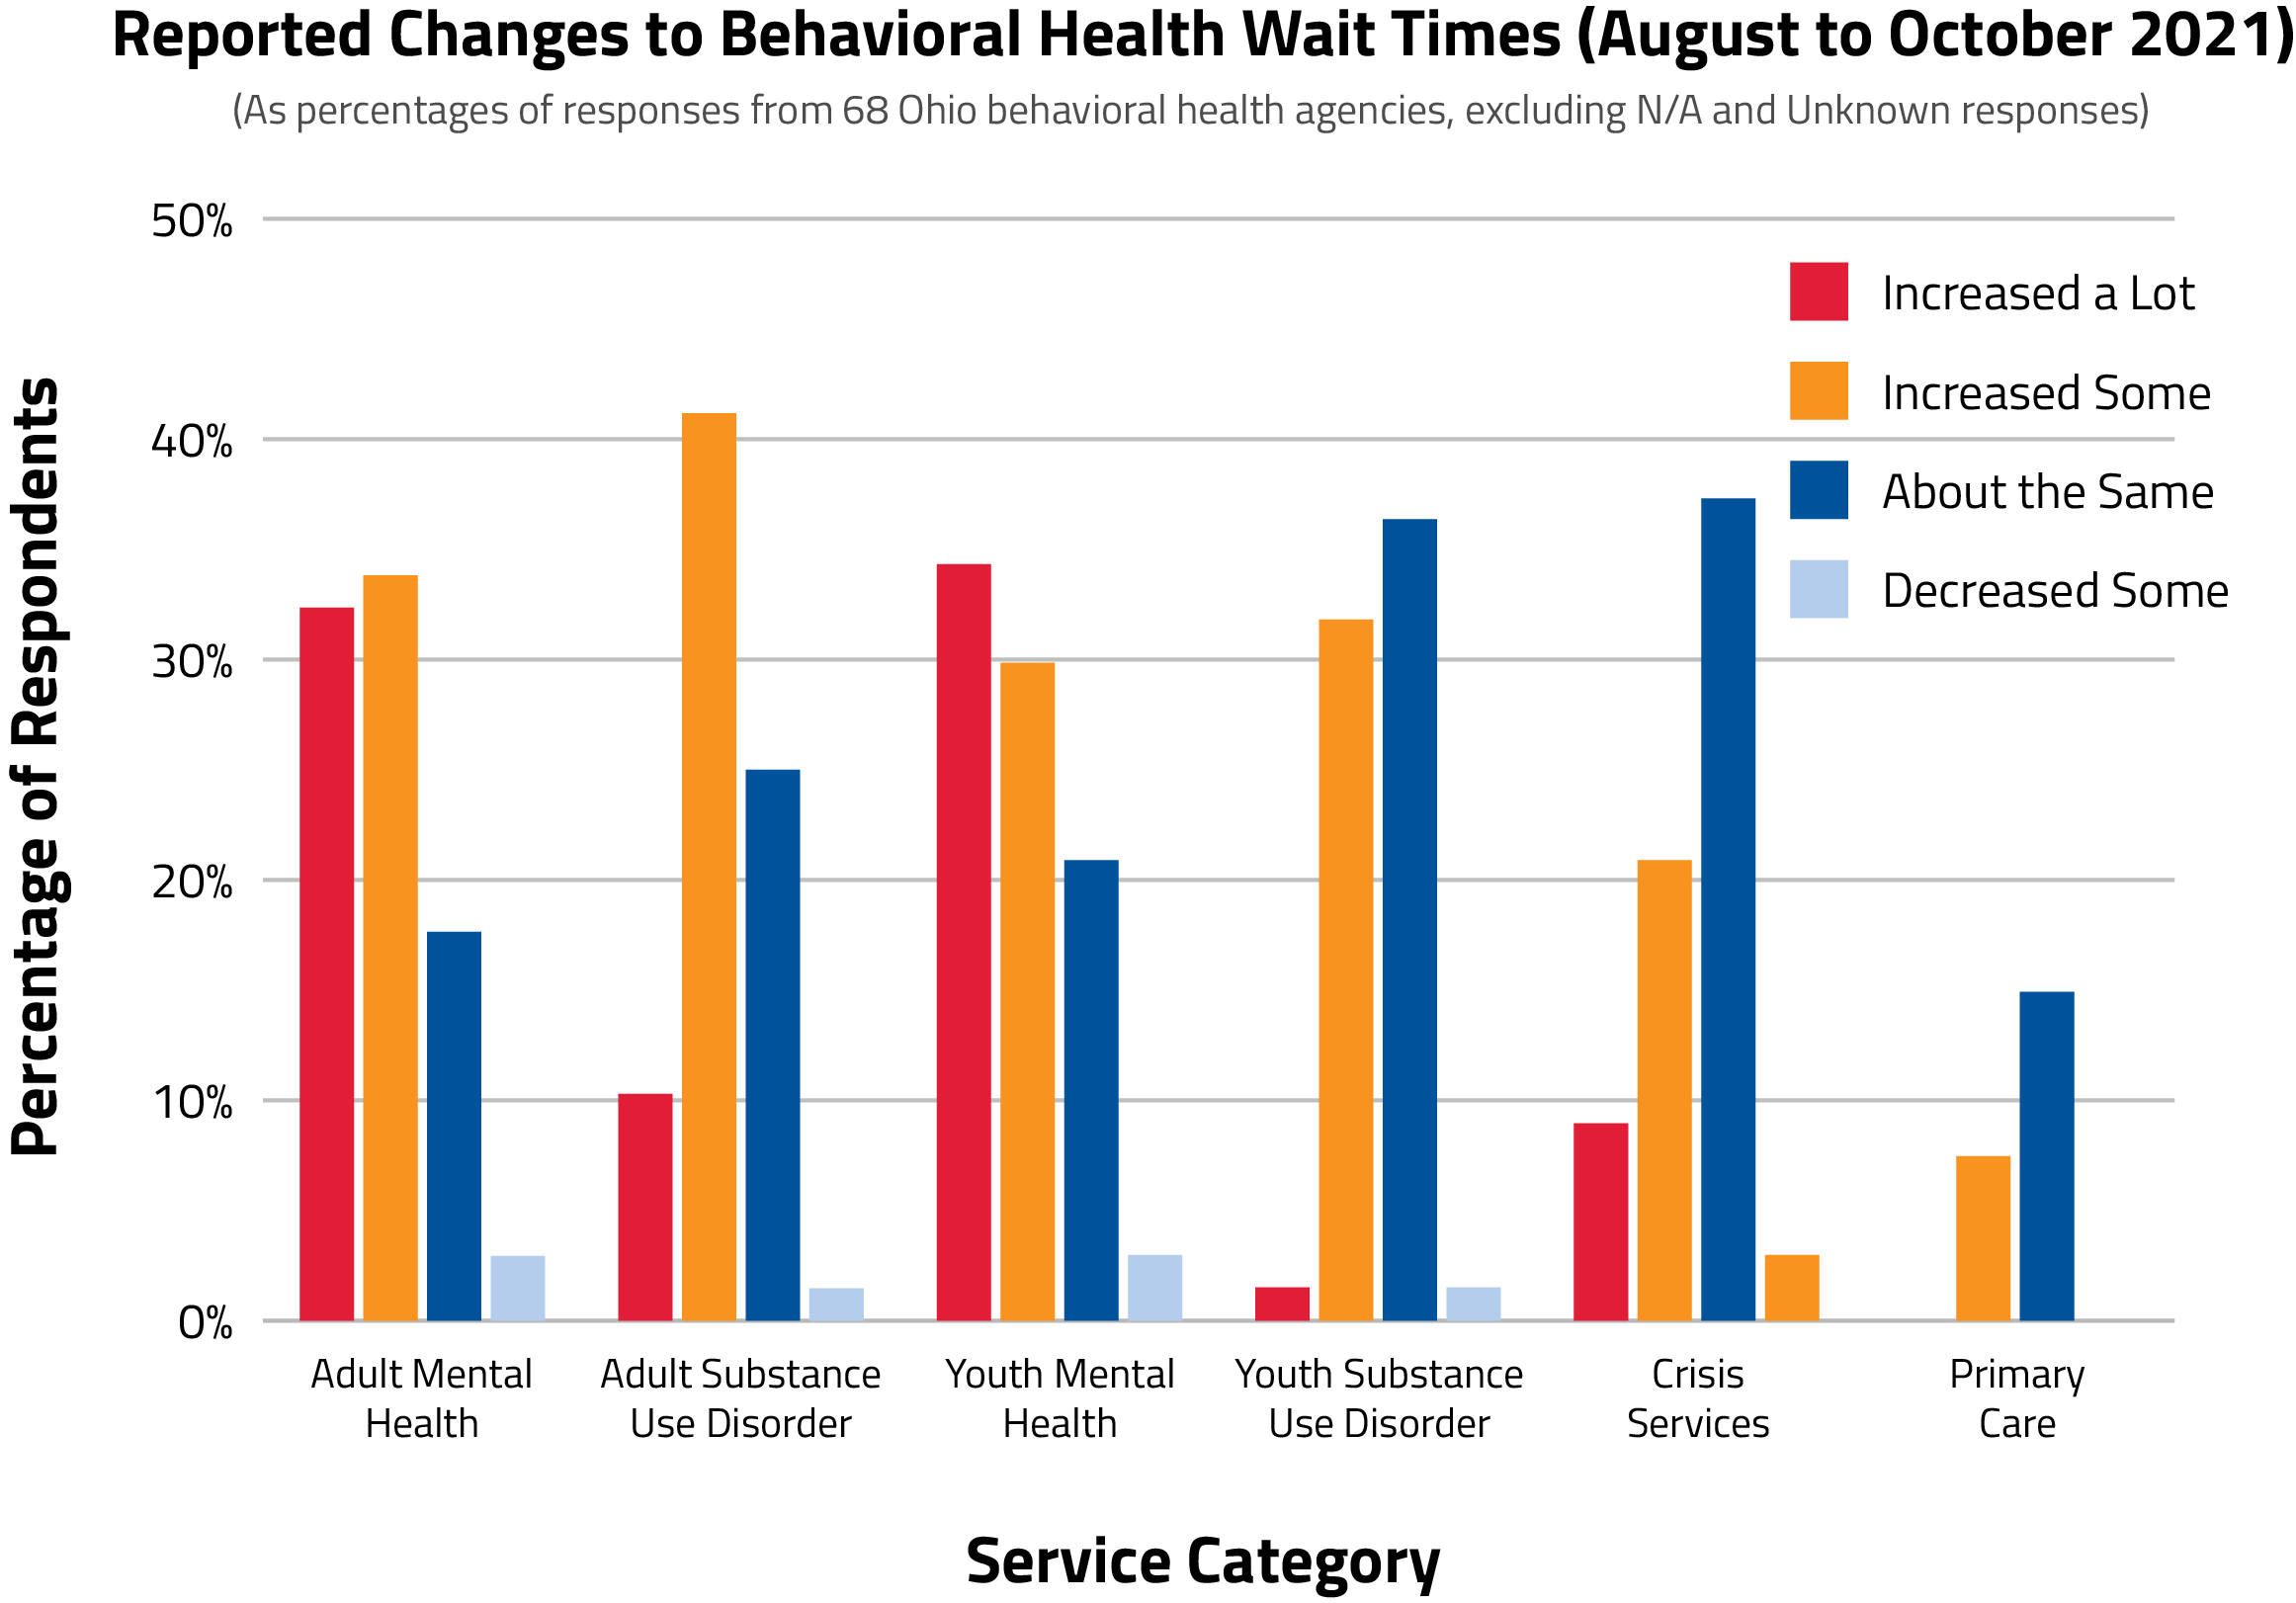 Bar graph showing increases in wait times for behavioral health services.